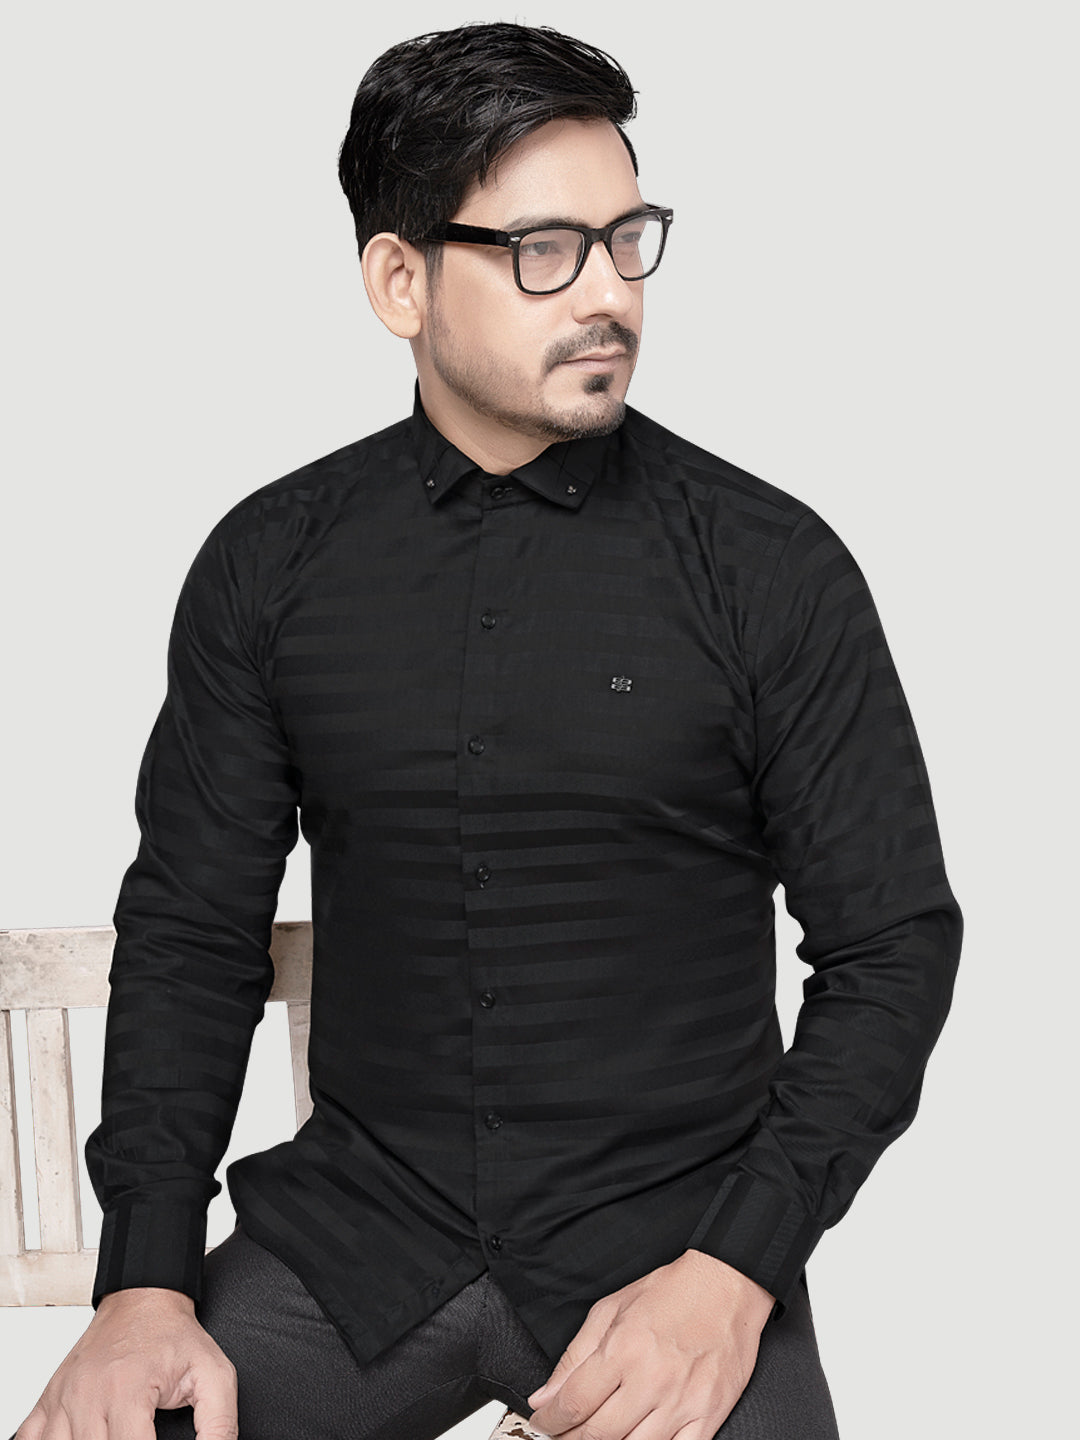 Black and White Shirts Men's Designer Weft Shirt with Collar Accessory-5